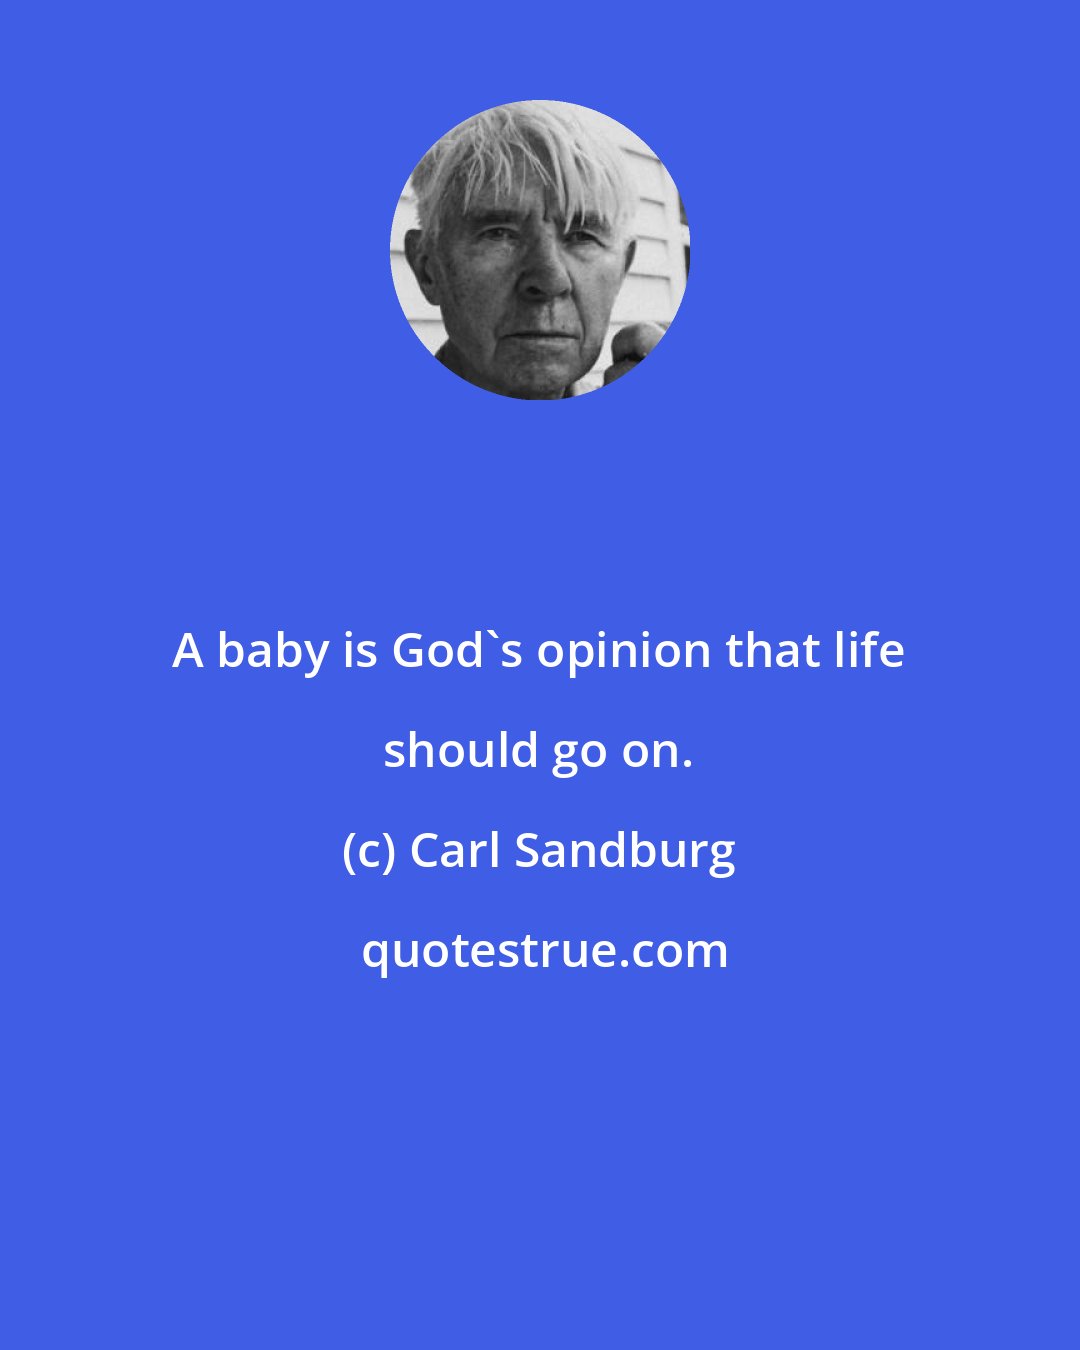 Carl Sandburg: A baby is God's opinion that life should go on.